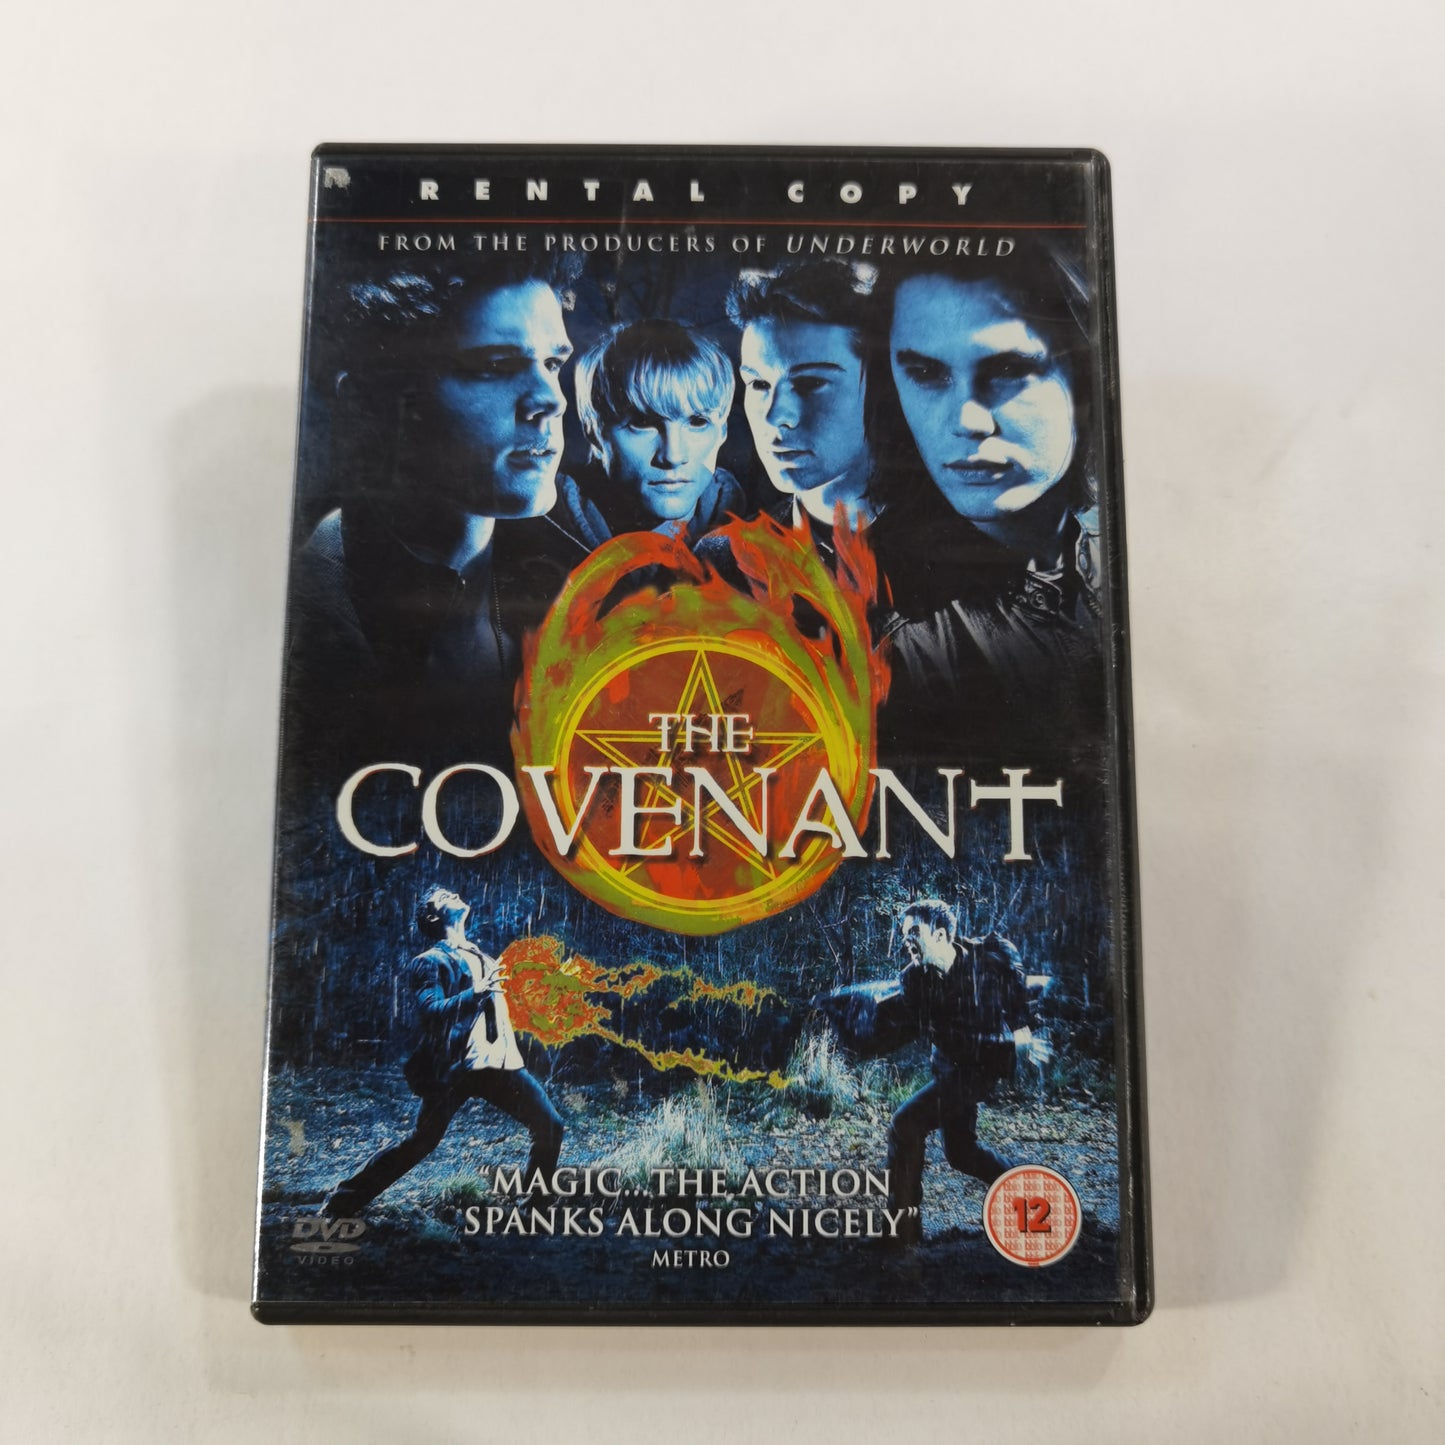 The Covenant (2006) - DVD UK 2007 RC